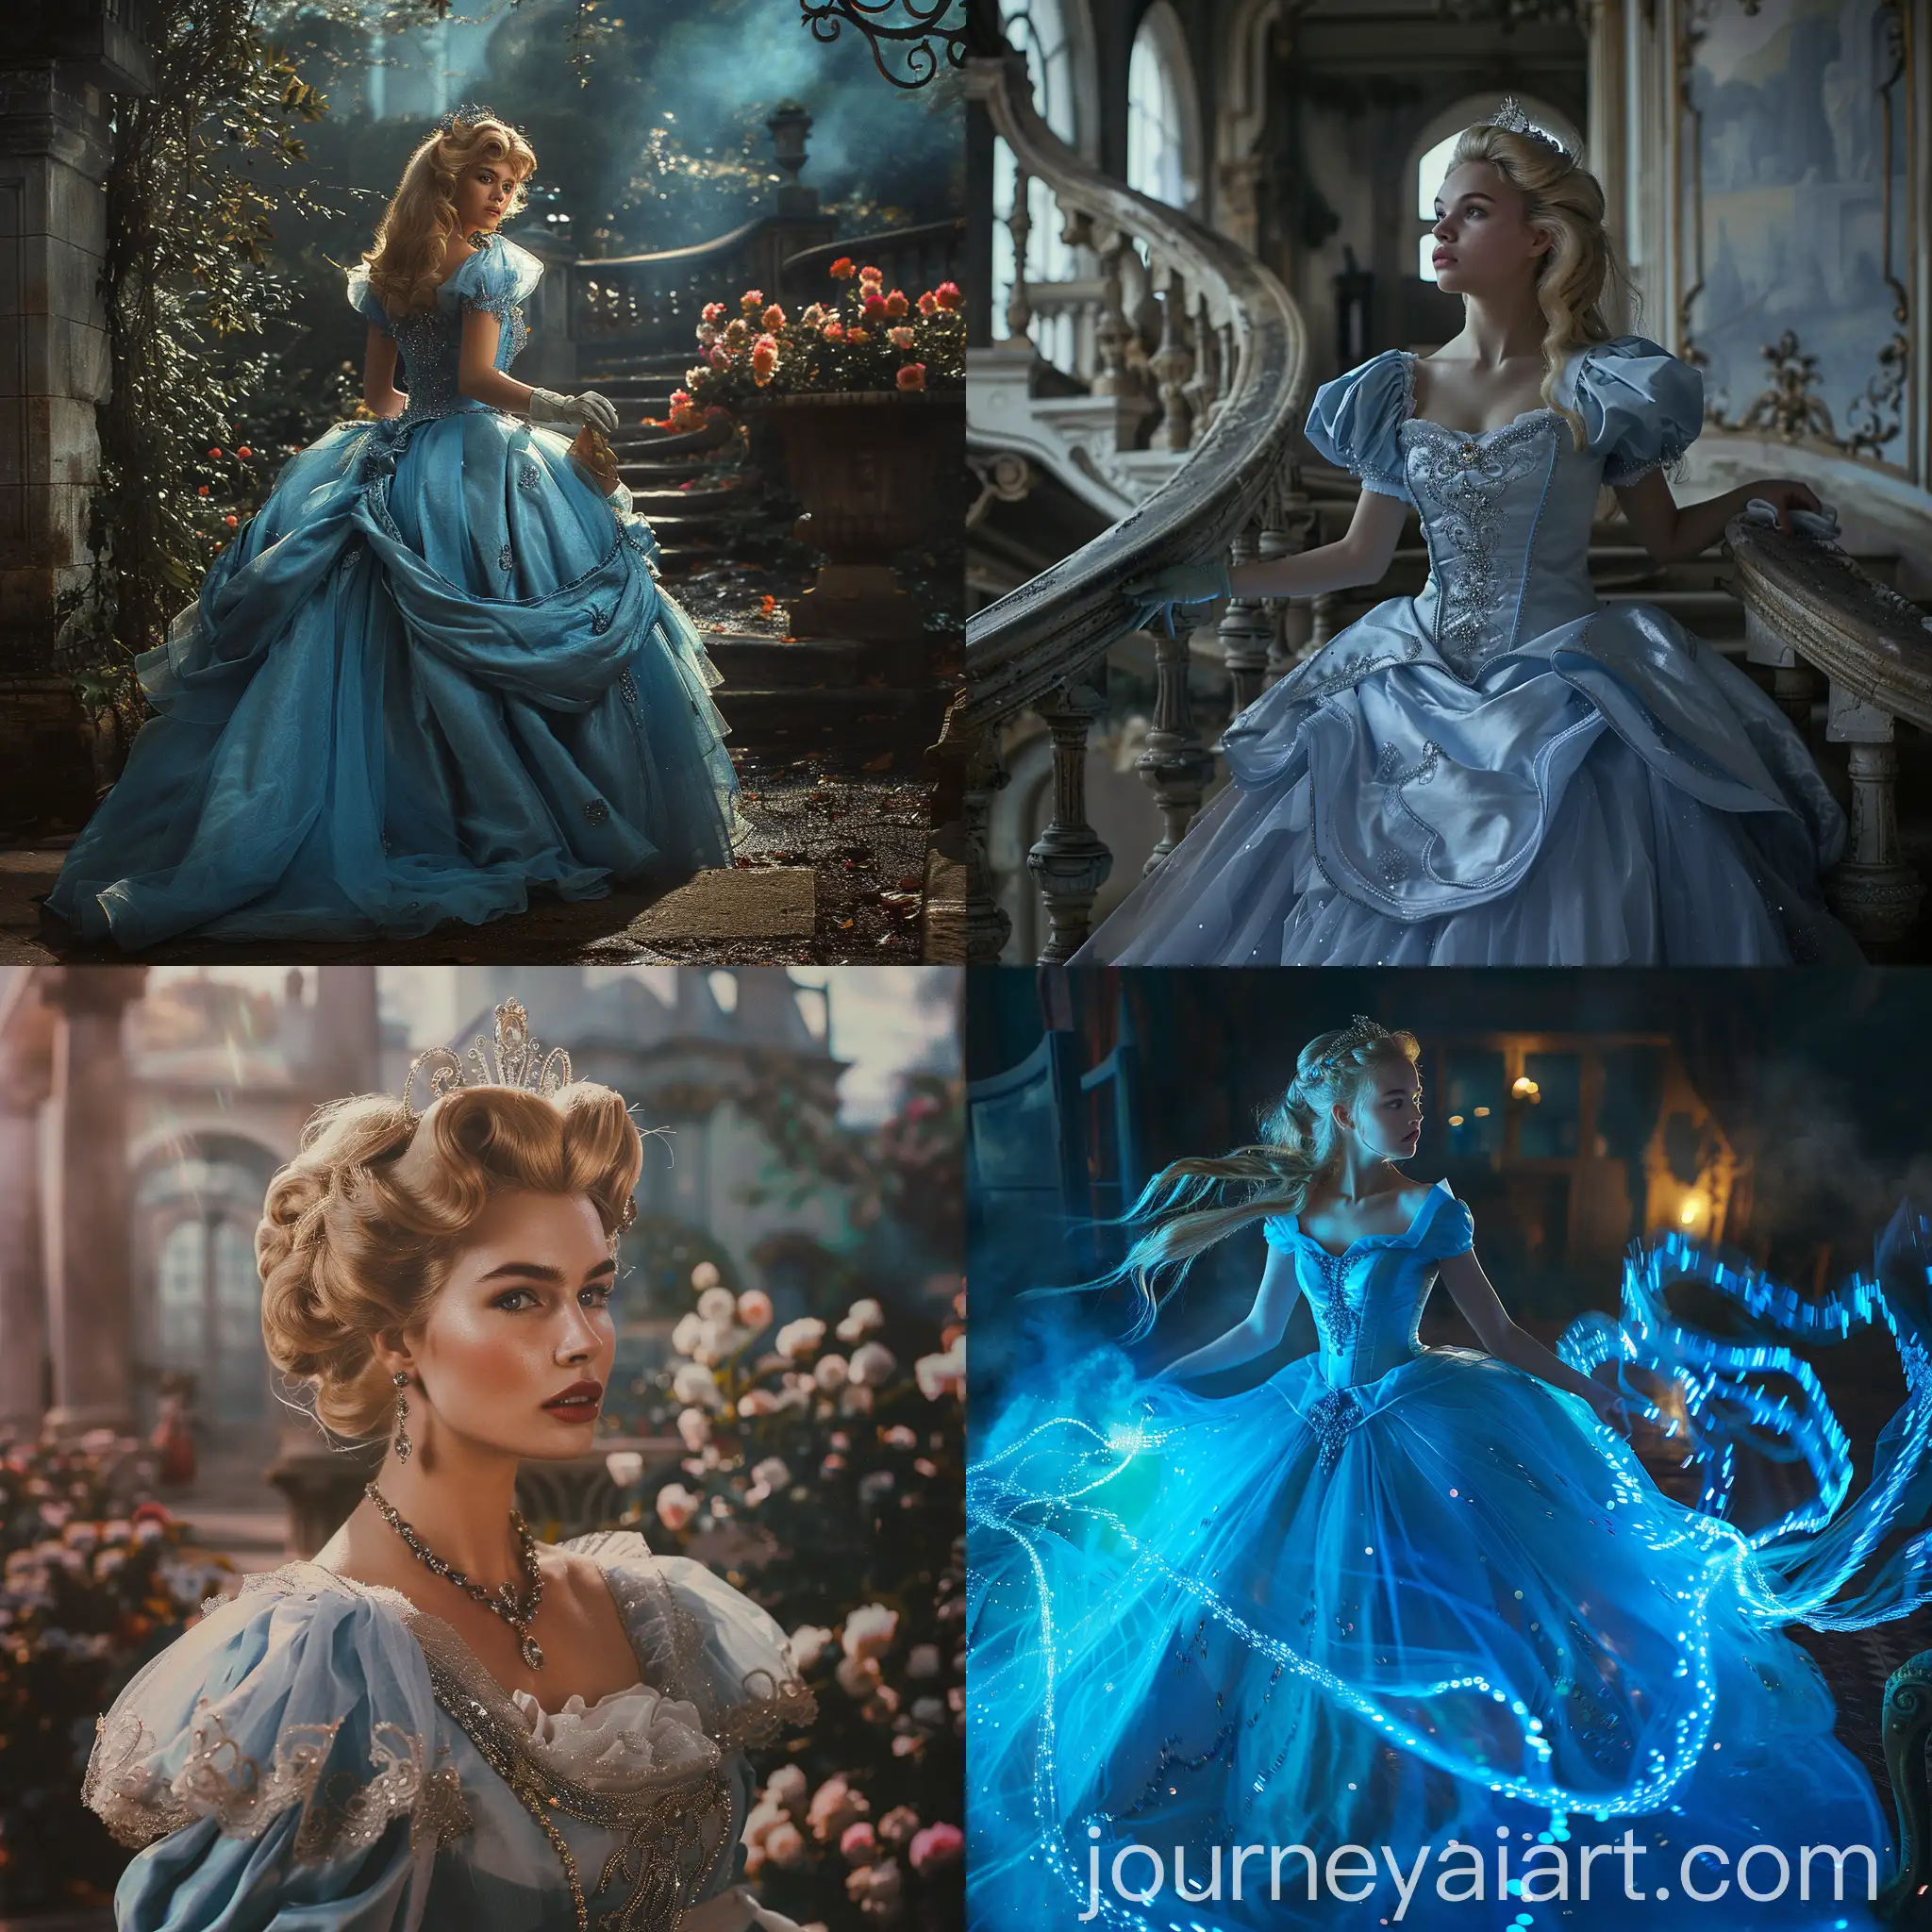 Live-Action-Scene-with-Cinderella-Character-in-Cinematographic-Style